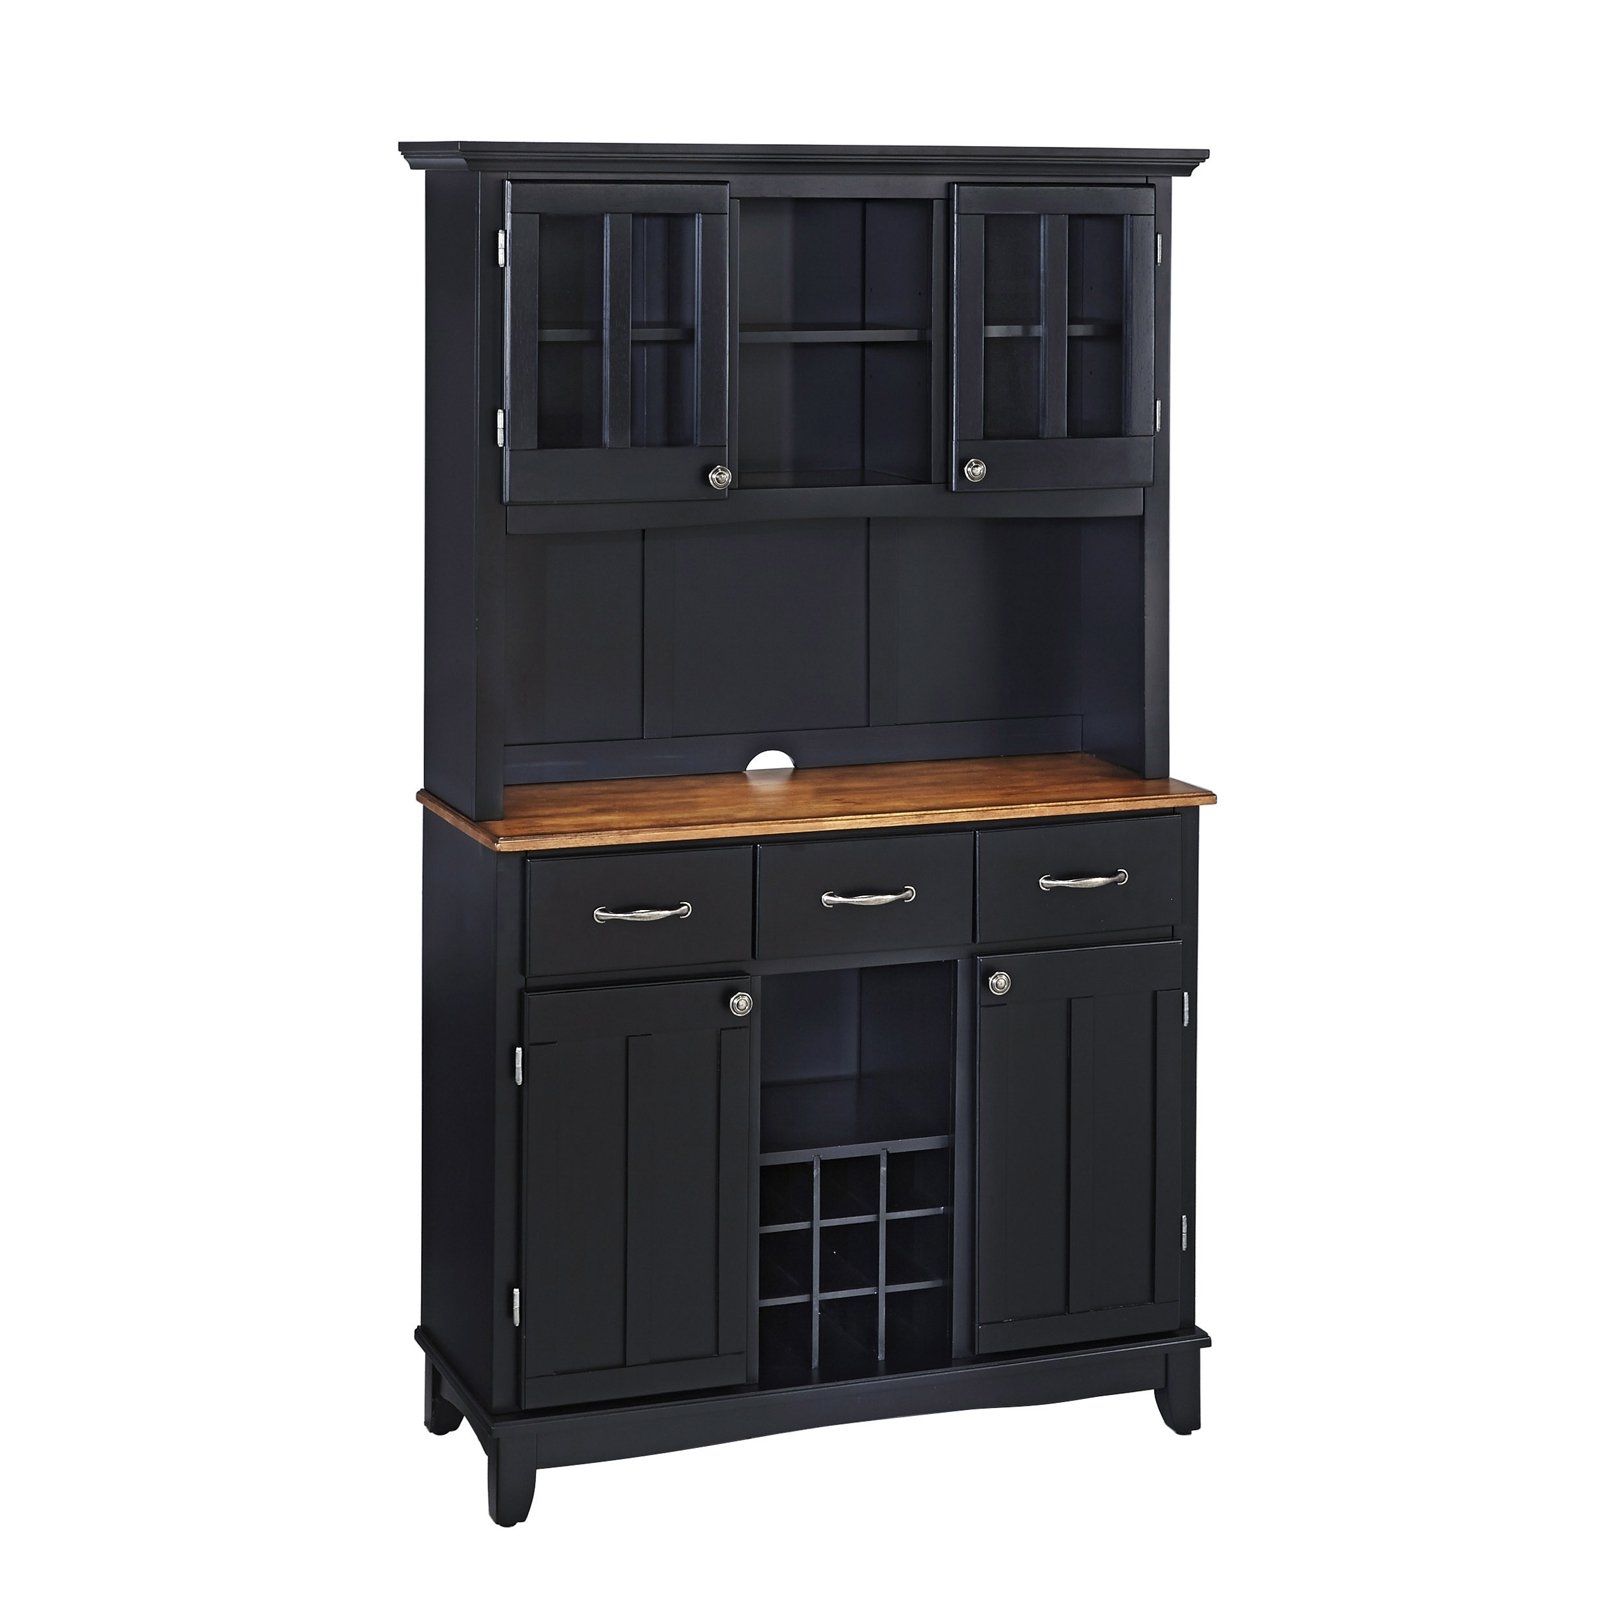 Kitchen Buffet And Hutches You Ll Love, Dining Room Server With Hutch